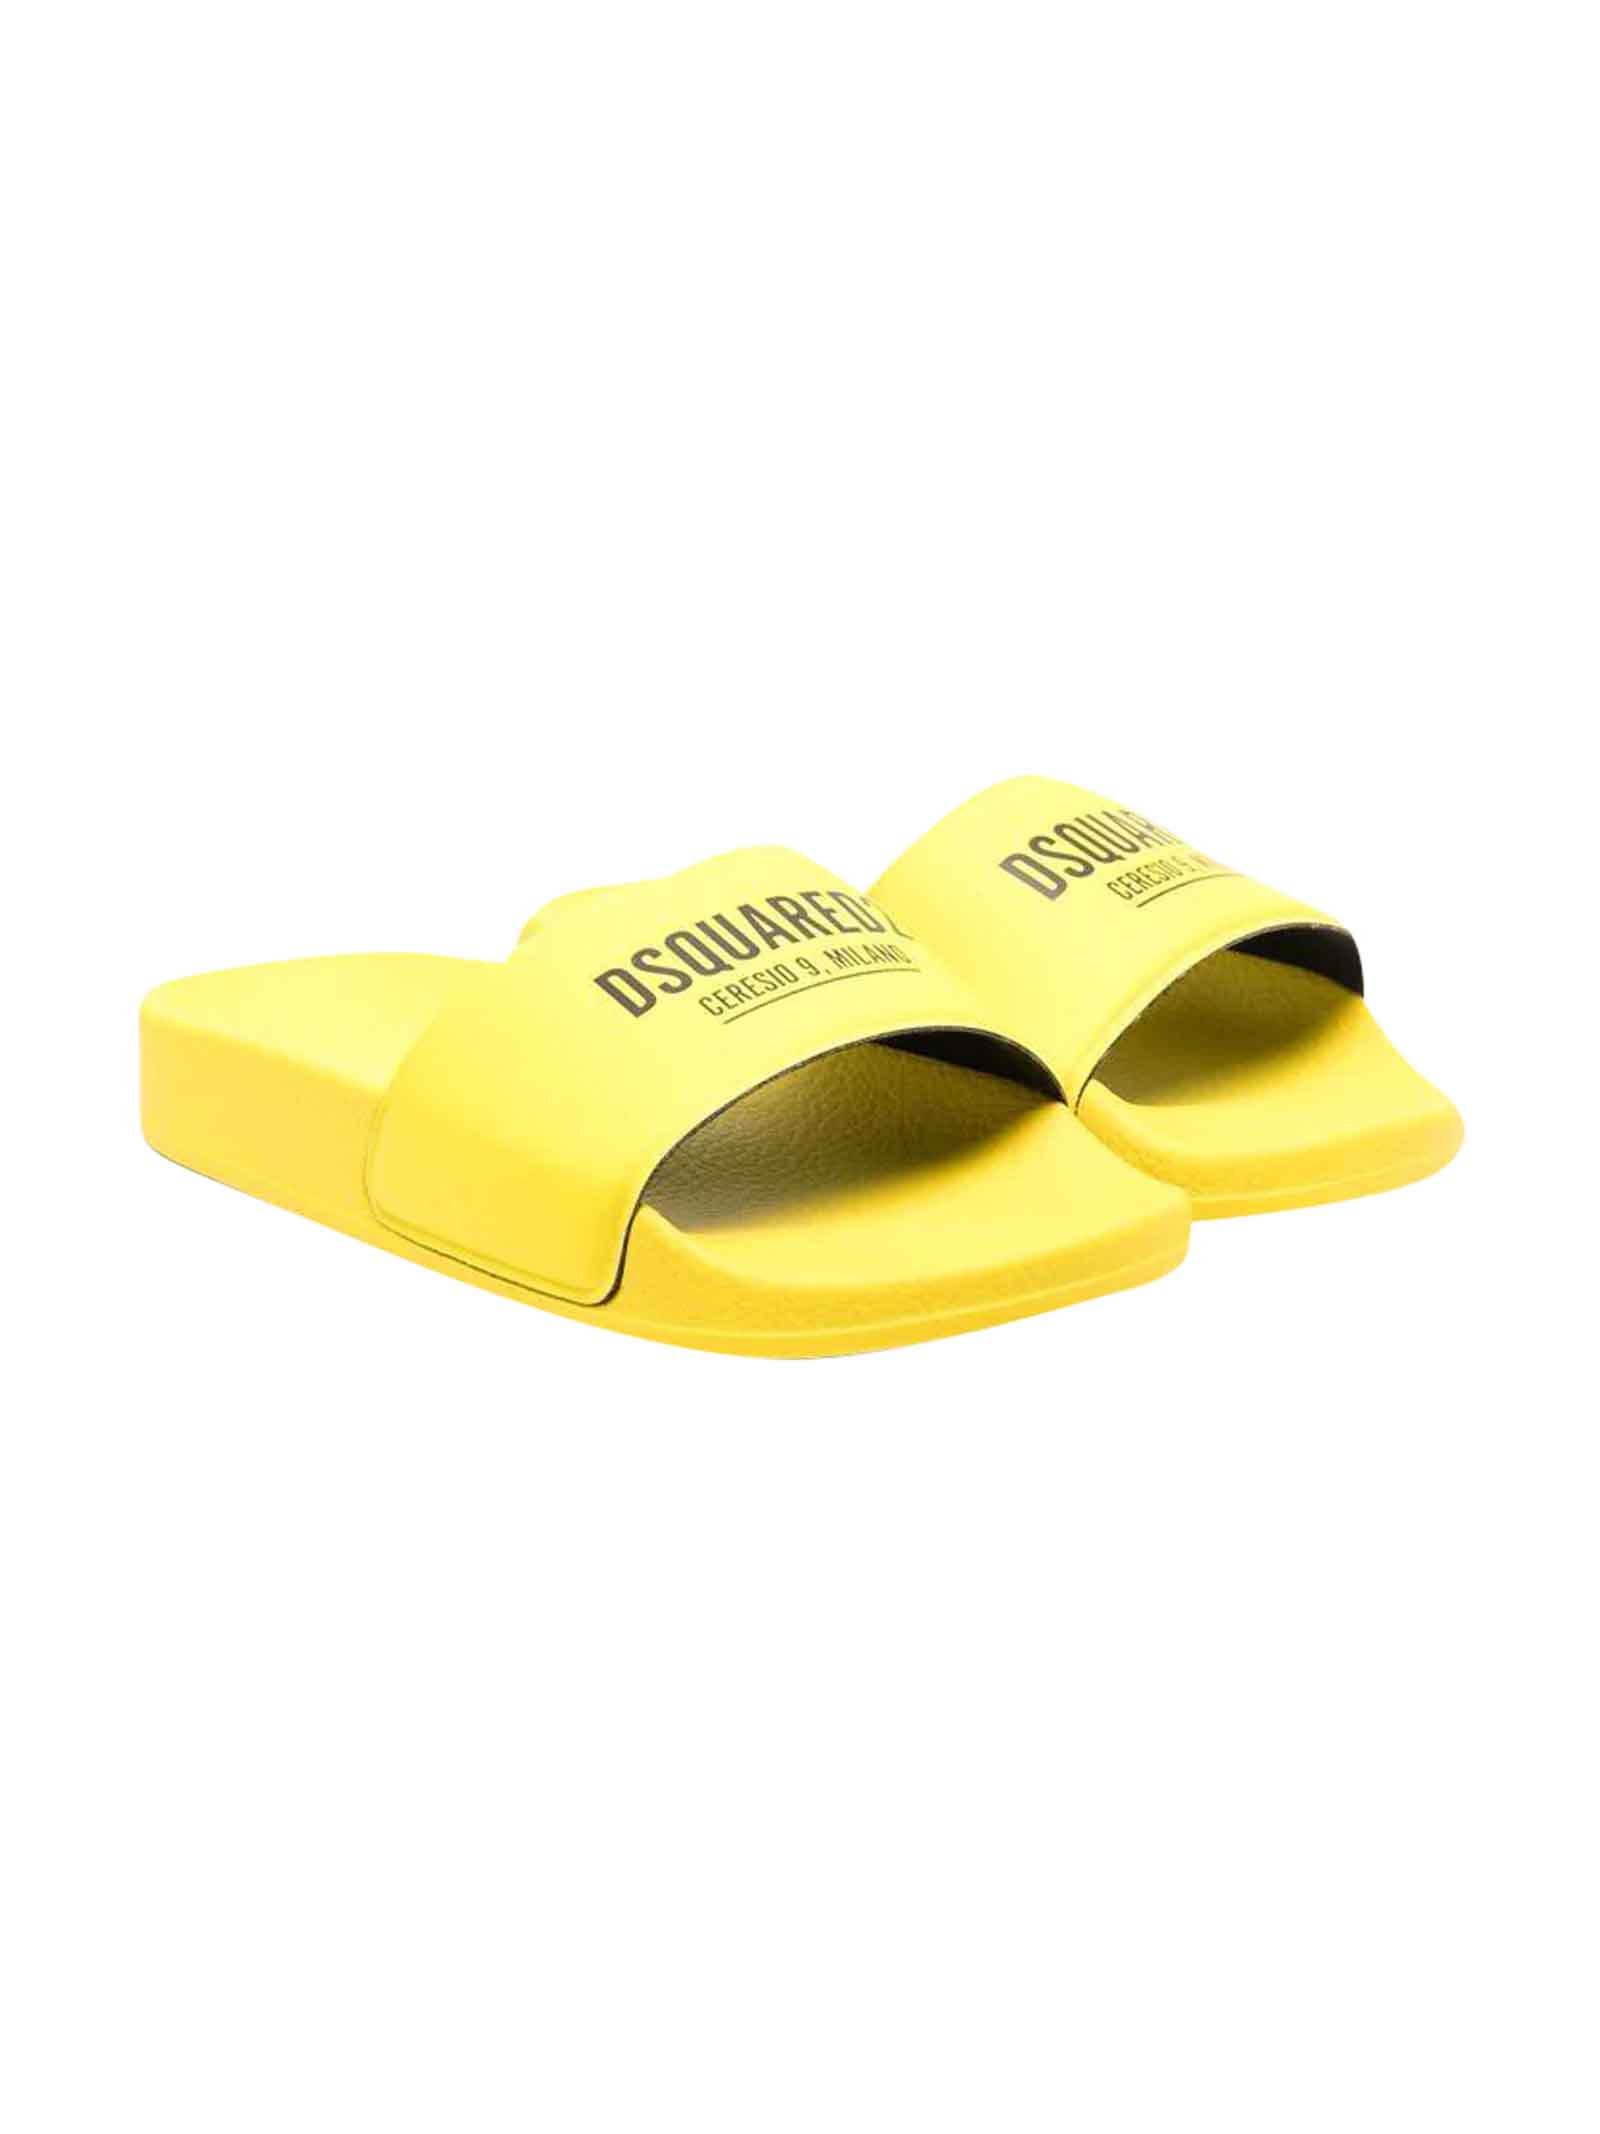 Dsquared2 Yellow Sandals Teen Unisex